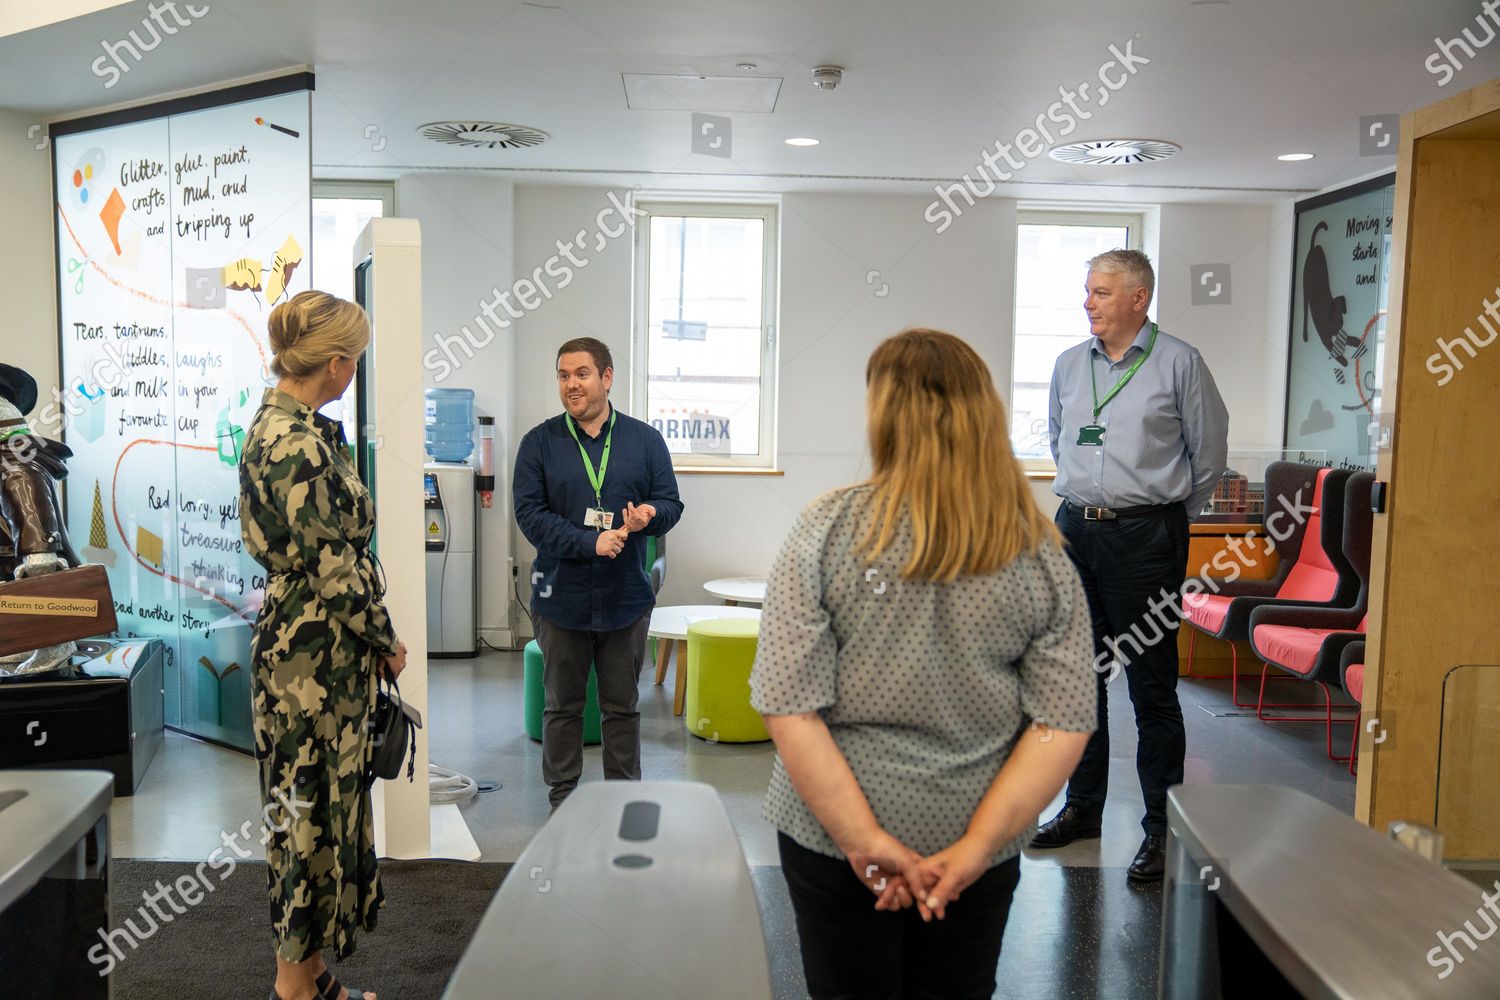 sophie-countess-of-wessex-joins-a-counselling-shift-at-childline-nspcc-hq-london-uk-shutterstock-editorial-10682513a.jpg